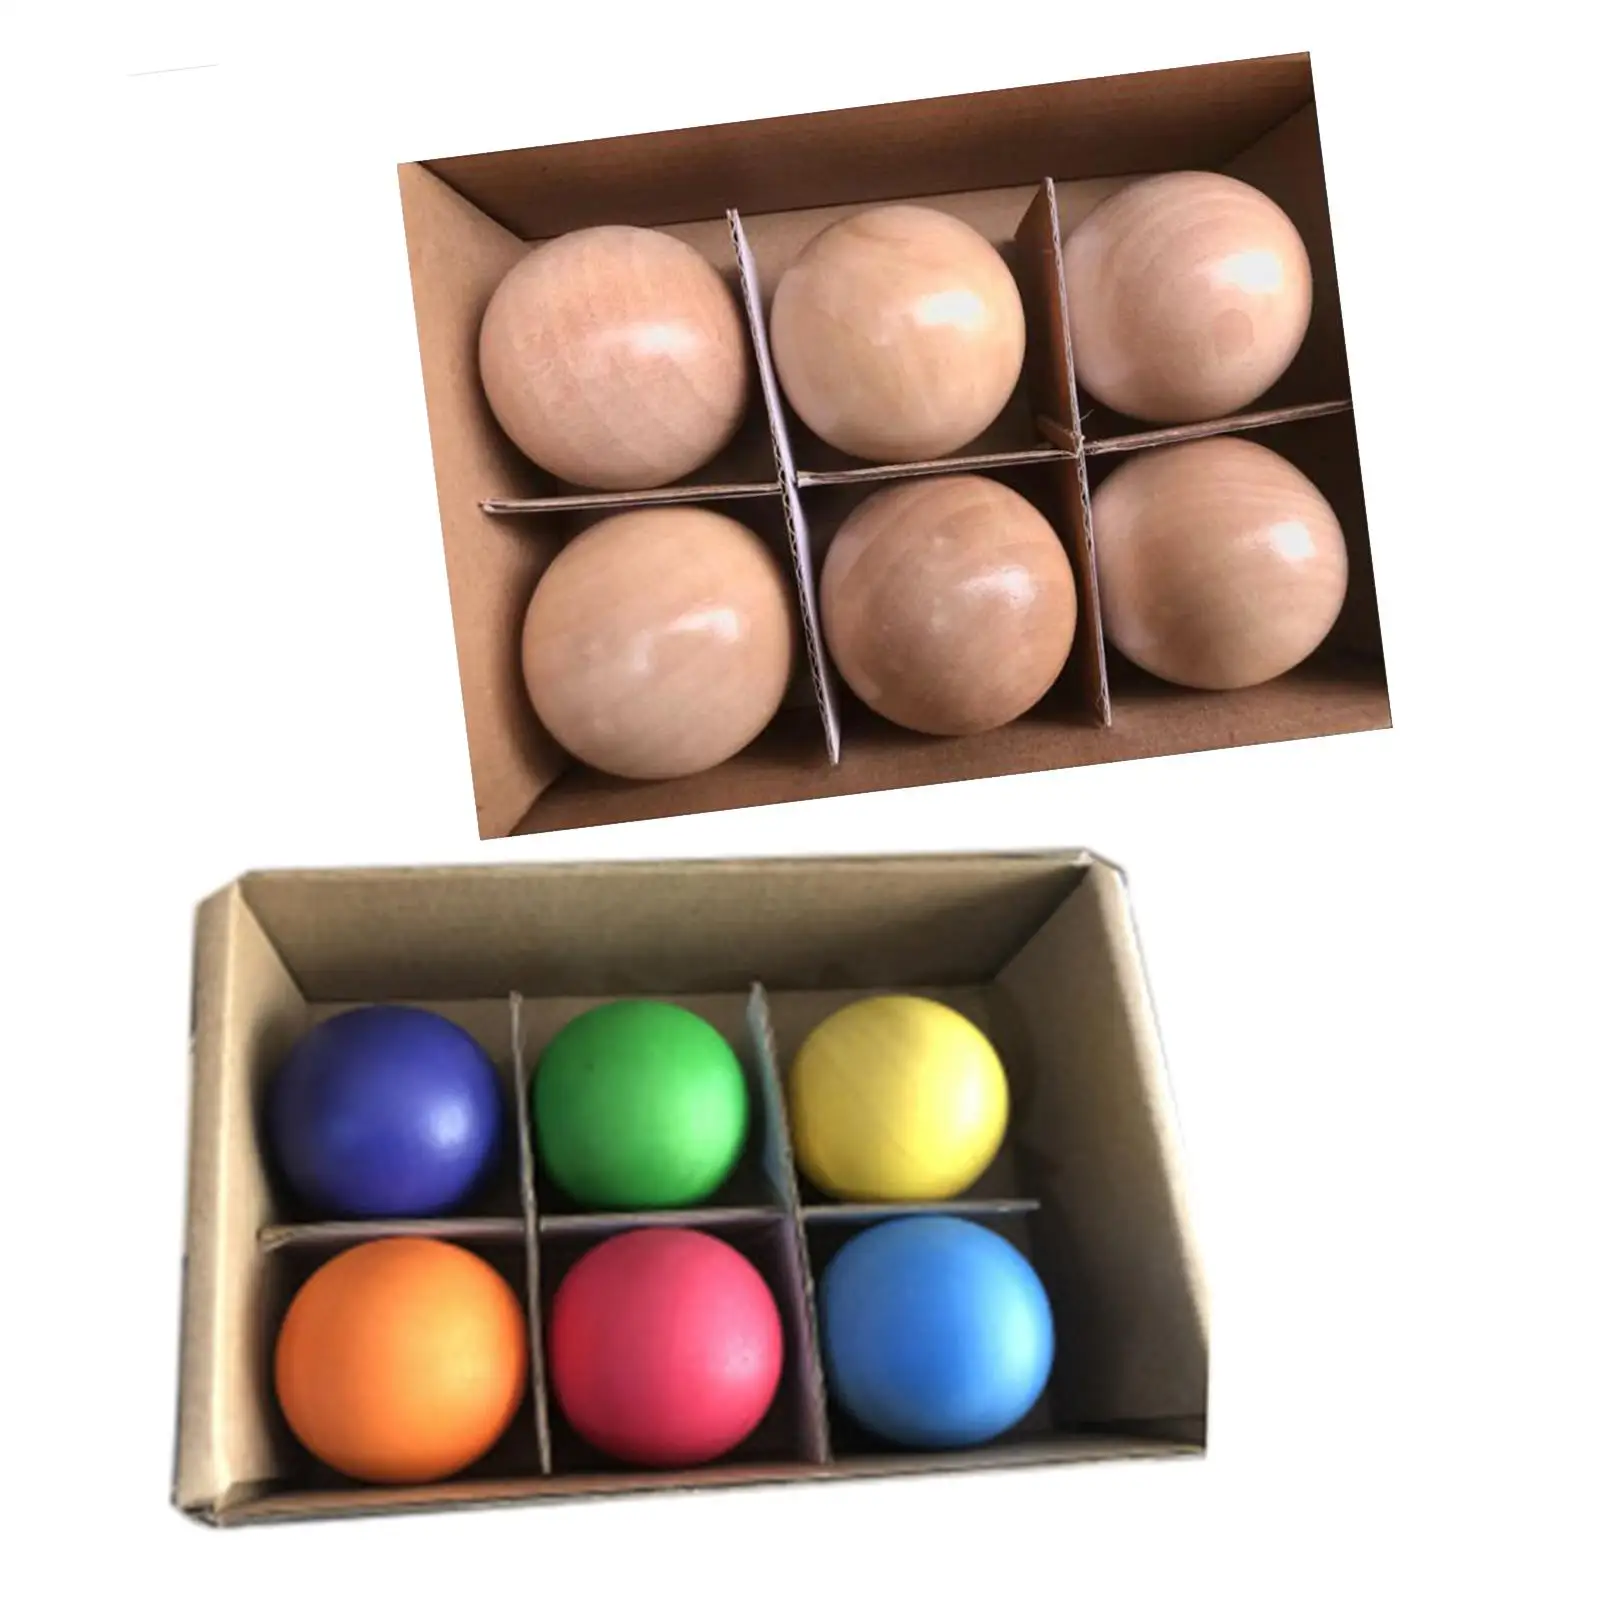 6x Montessori Wooden Balls Counting Toy for Hand Eye Coordination Creativity Object Permanence Box Handcraft Wooden Toys